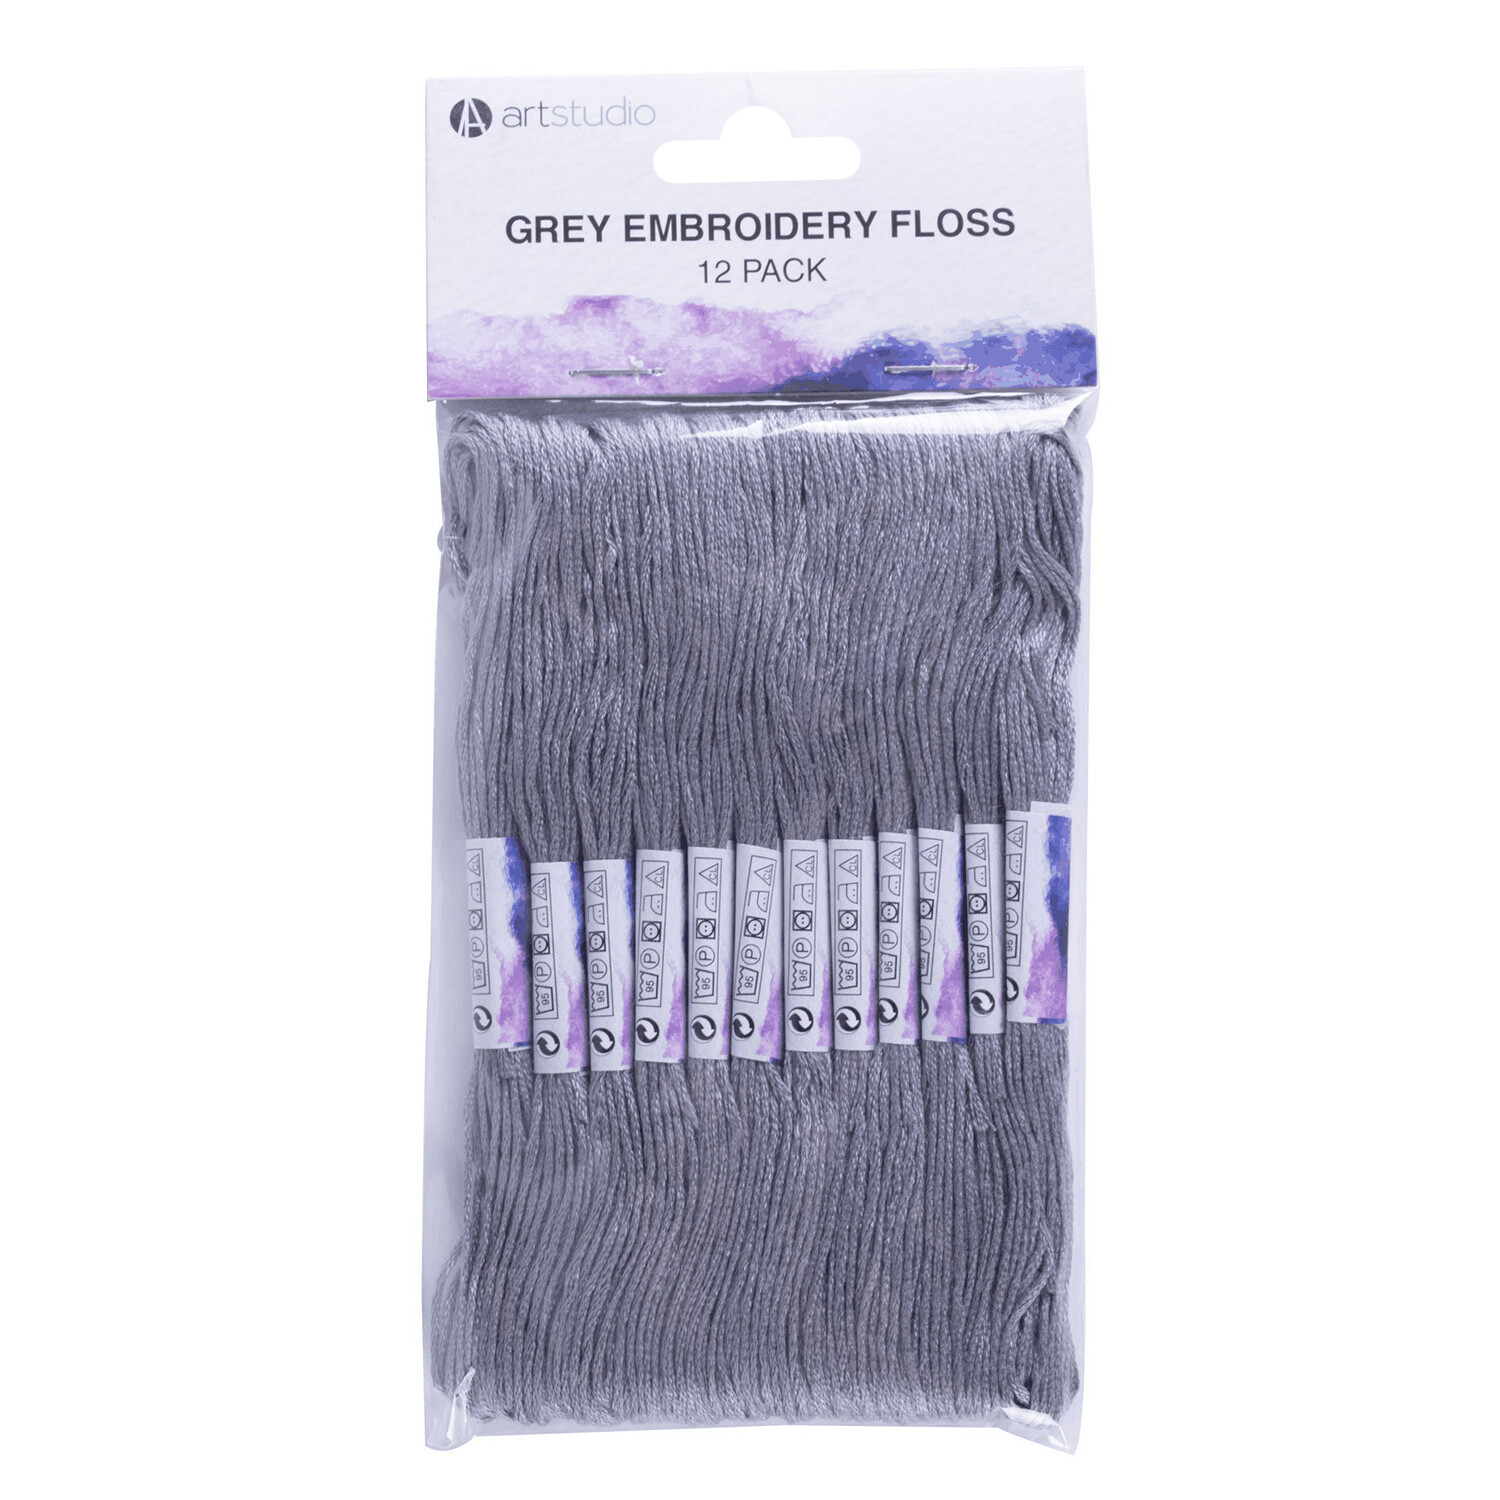 Art Studio Pack of 12 Grey Embroidery Floss - Grey Image 2